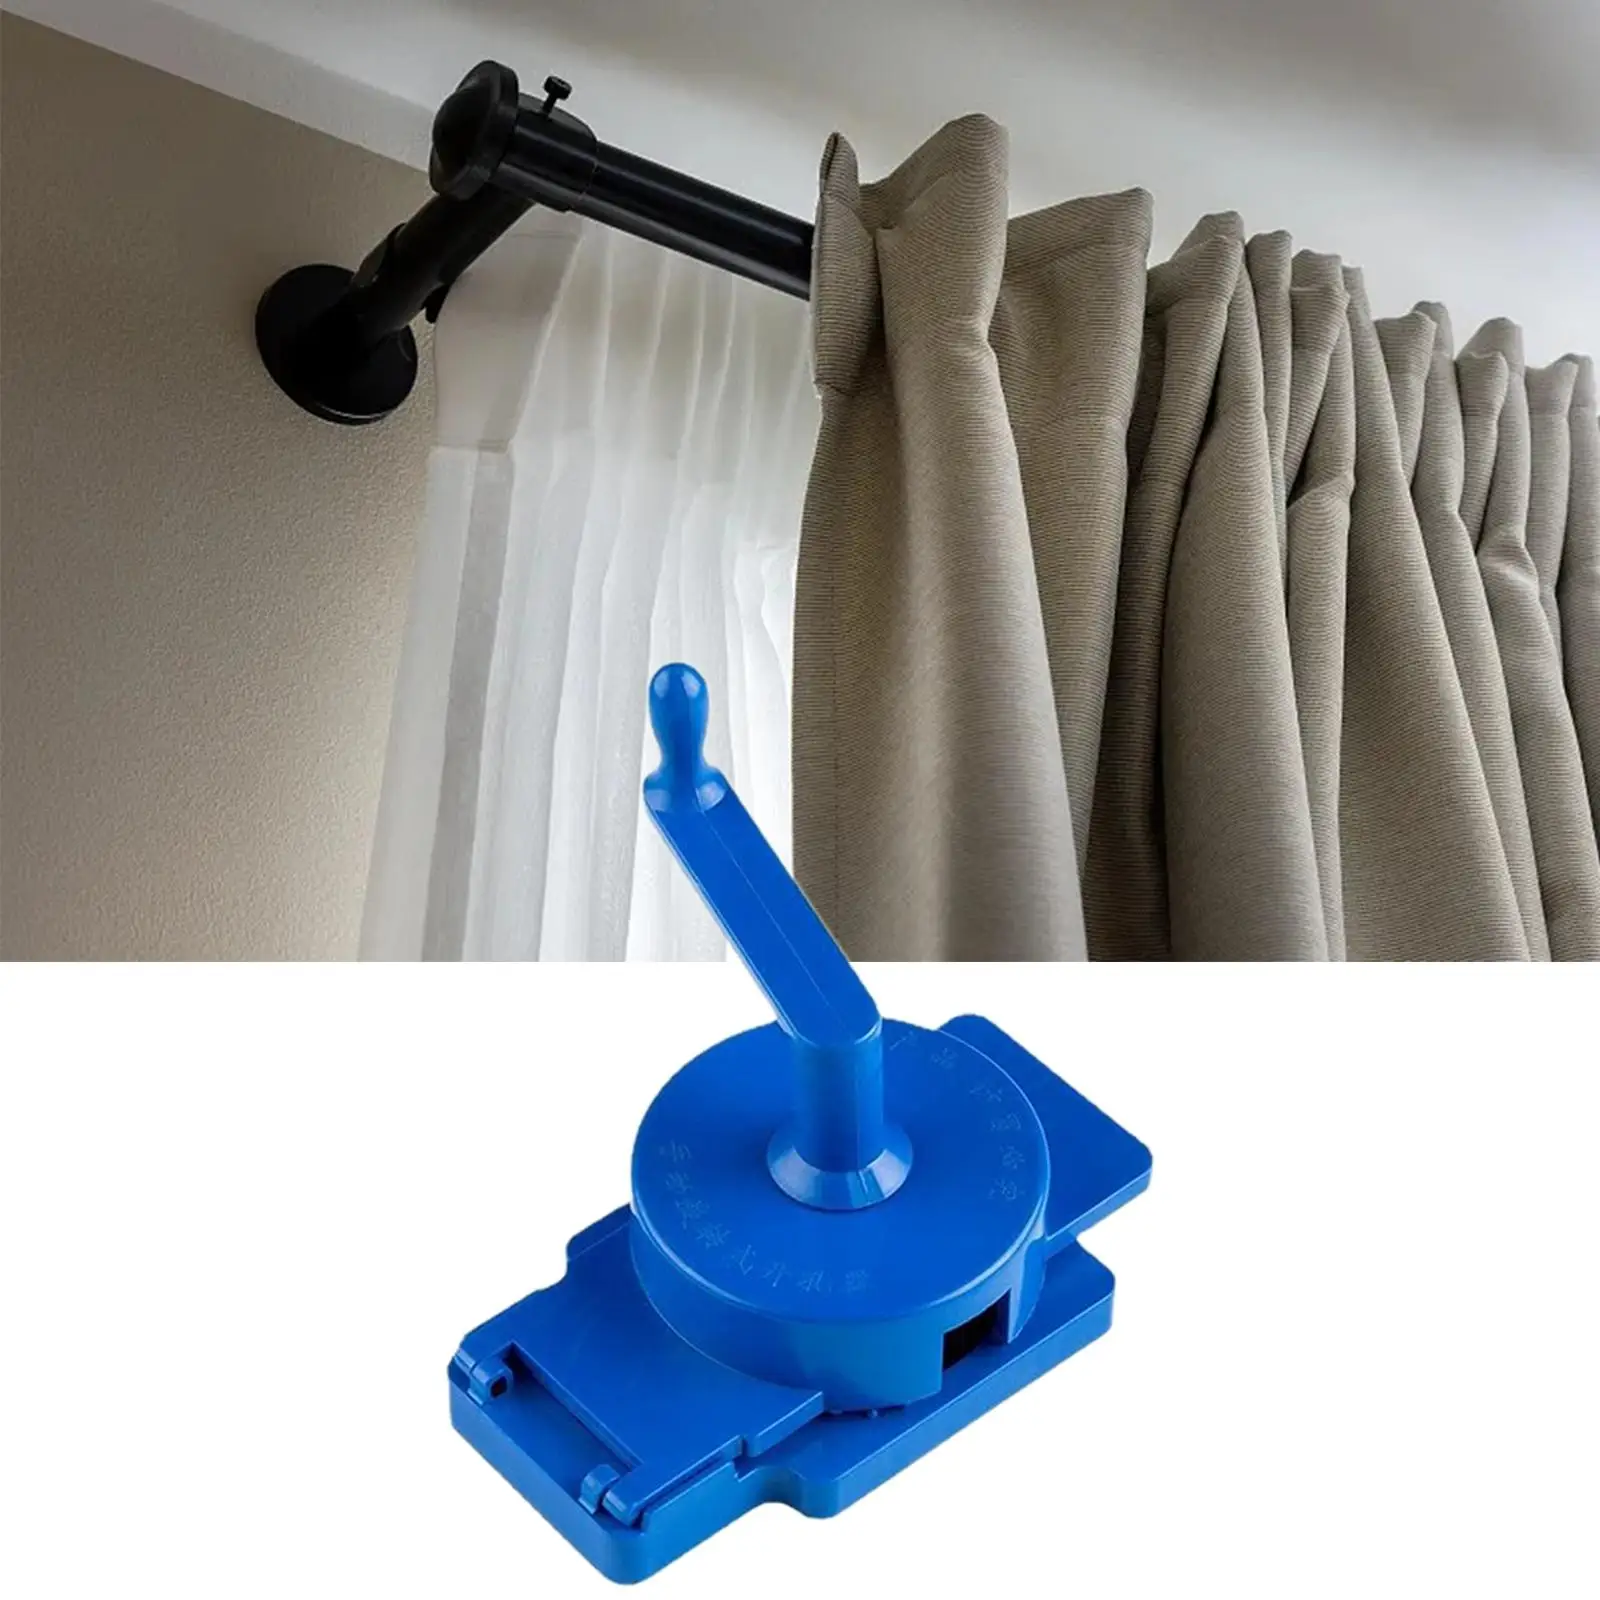 Curtain Hole Puncher Devices Easy to Use Durable DIY Tool Hand Punch Tool for Home Curtain Cloth Grommet Craft Eyelets